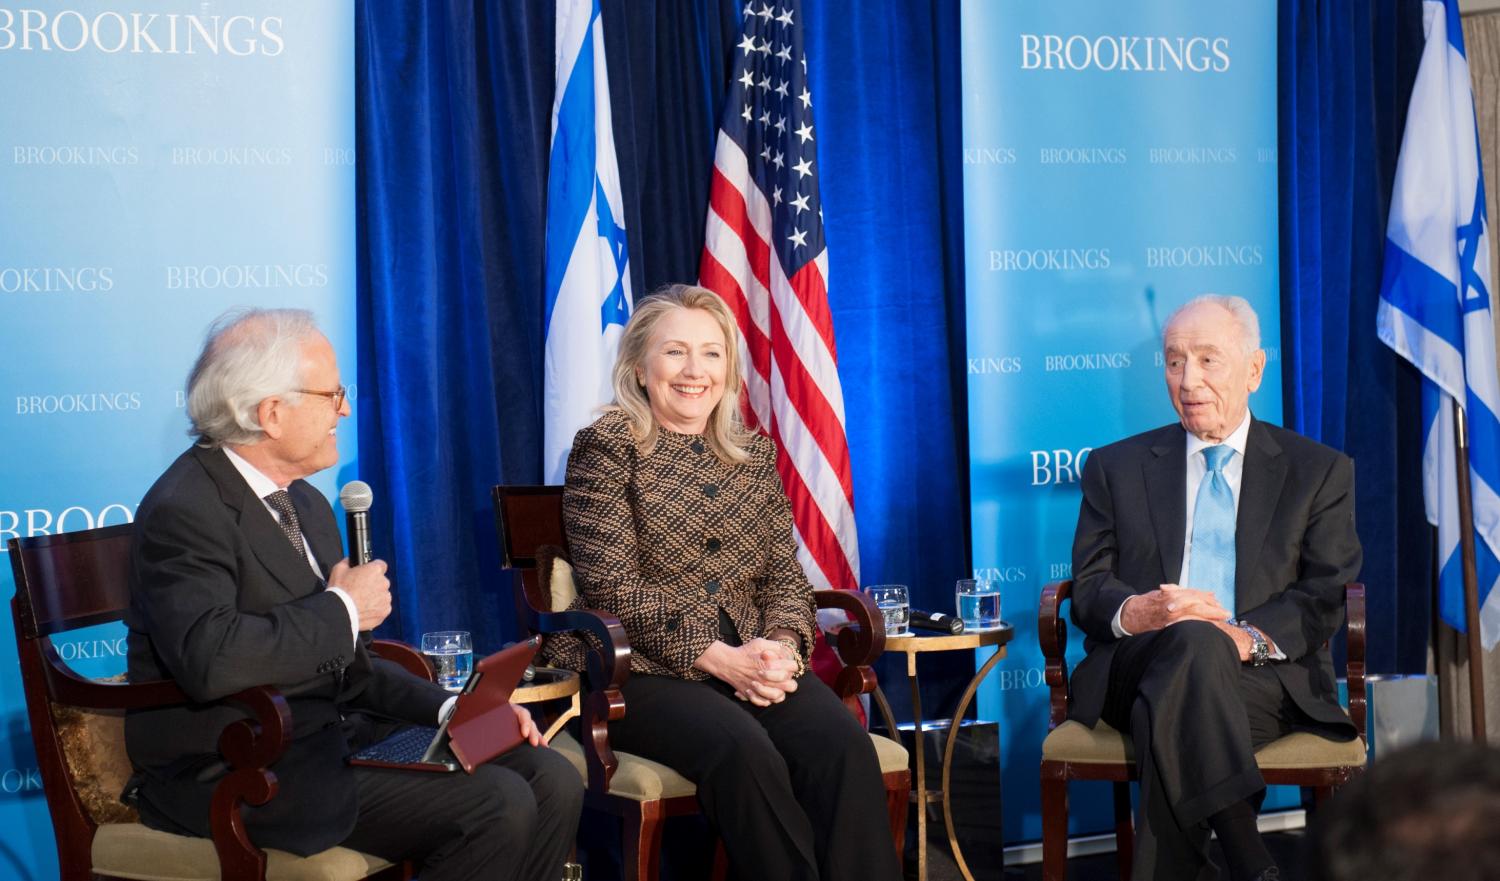 Brookings Executive Vice President Martin Indyk. U.S. Secretary of State Hillary Clinton, and former Israeli President Shimon Peres speak at an event at Brookings on June 12, 2012.